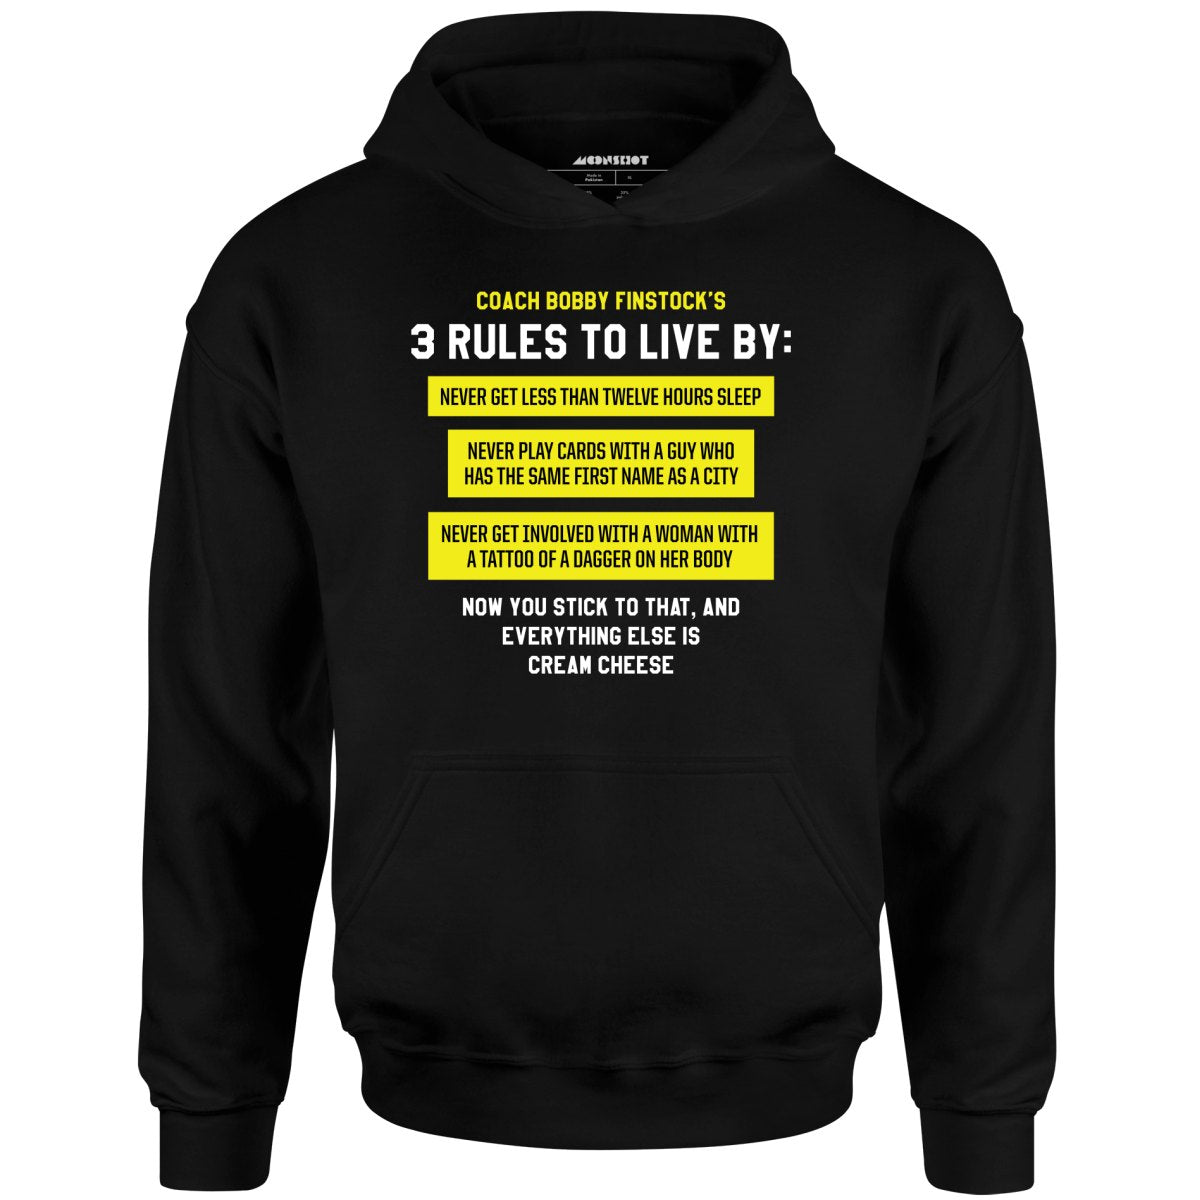 Coach Bobby Finstock's 3 Rules to Live By - Unisex Hoodie